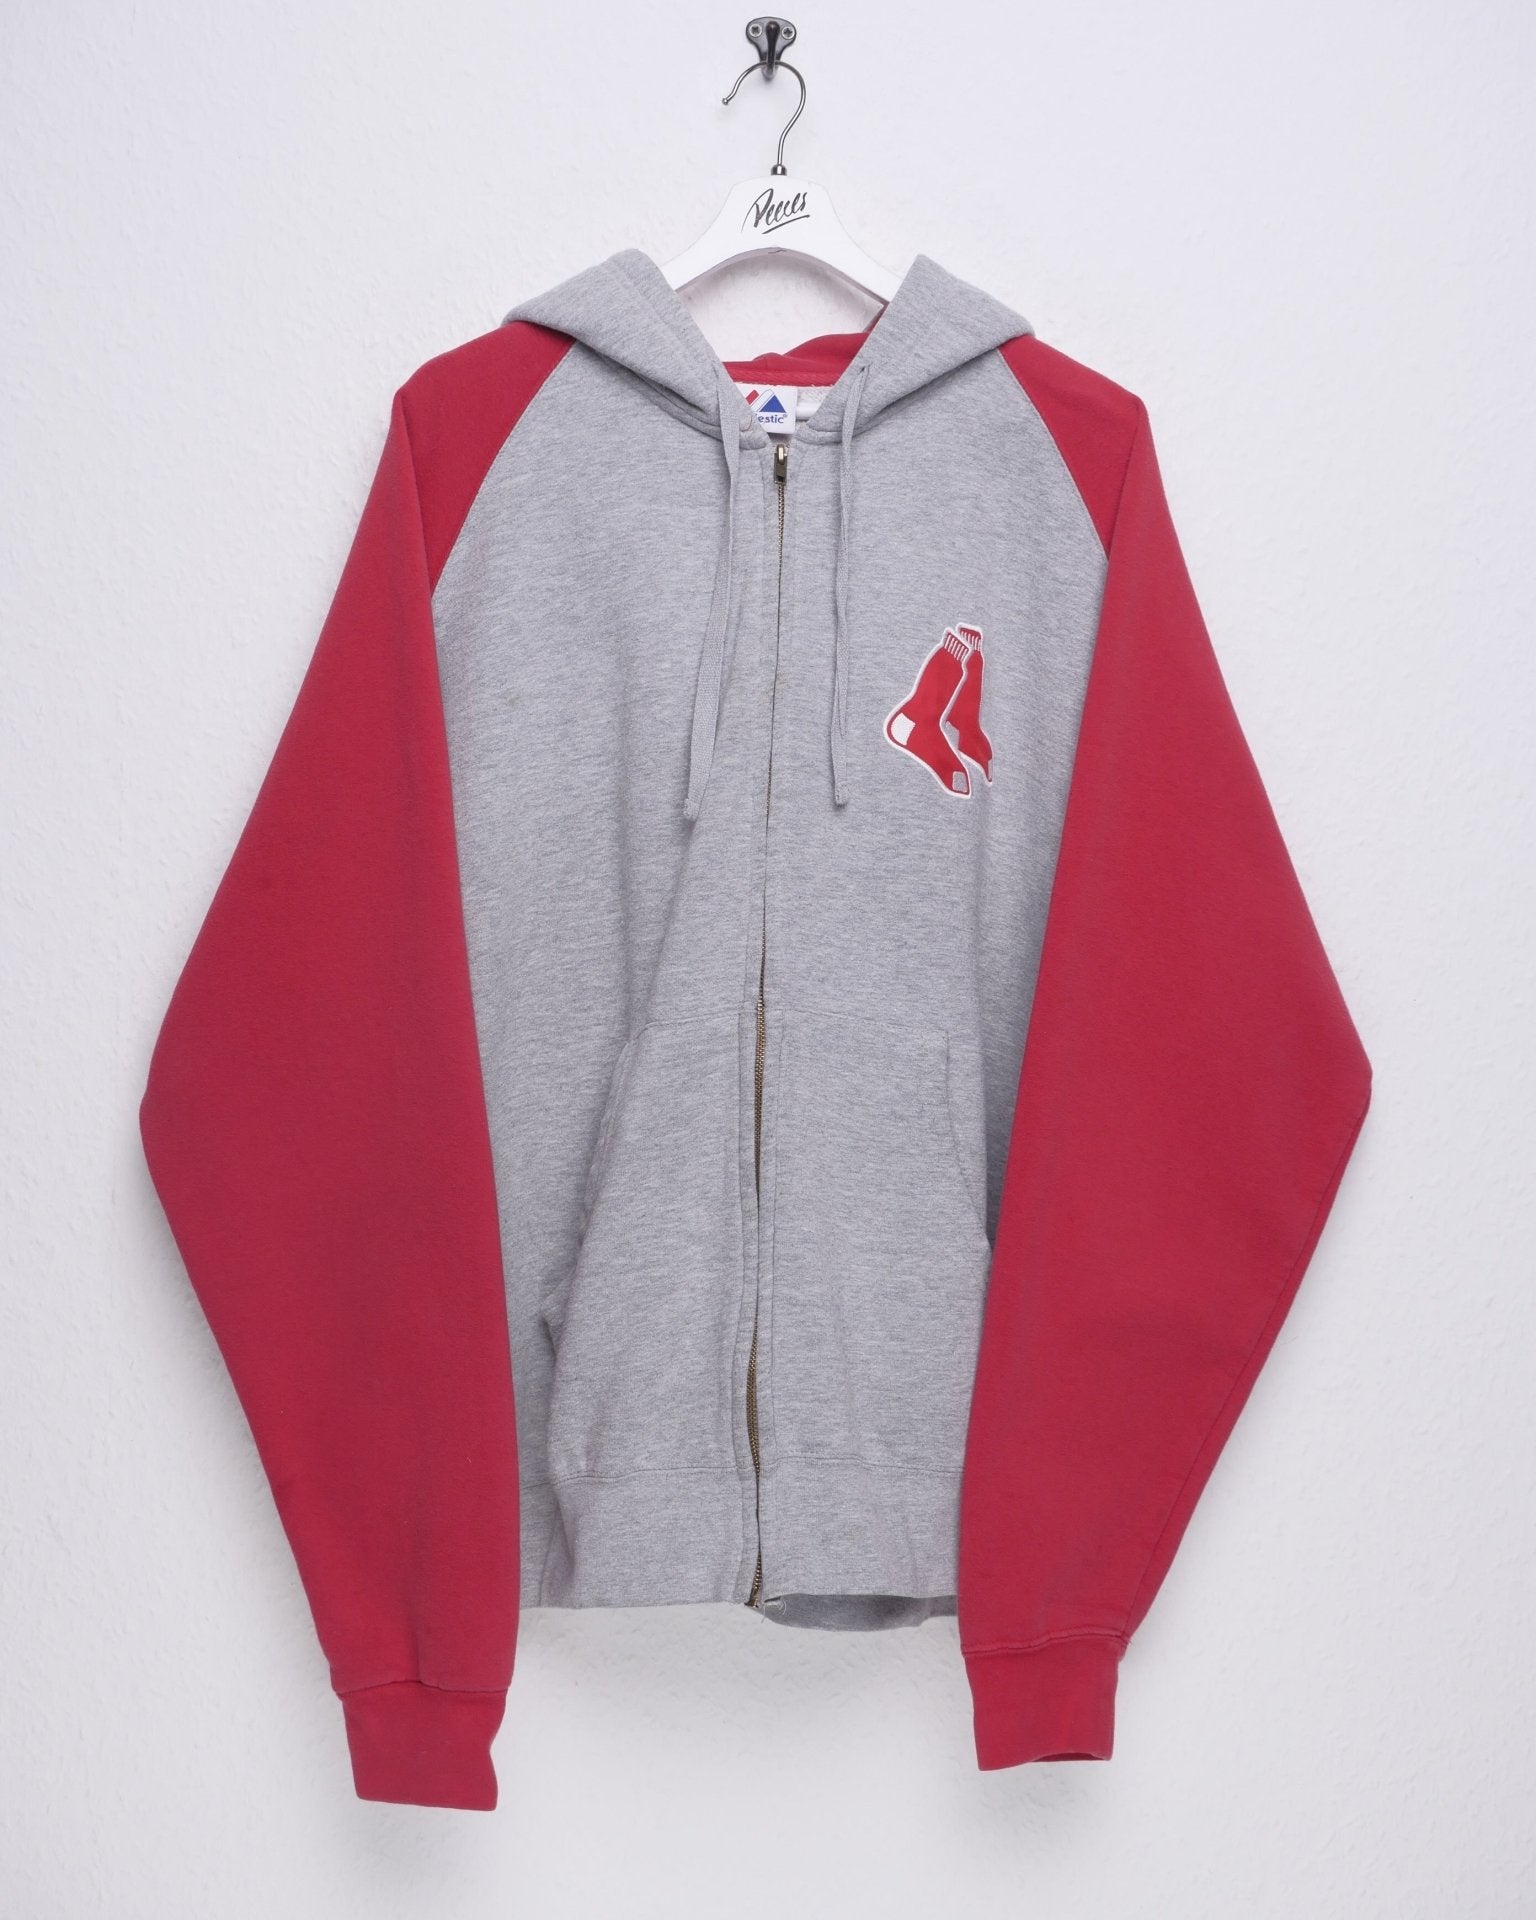 Majestic Boston Red Sox embroidered Logo two toned Zip Hoodie - Peeces